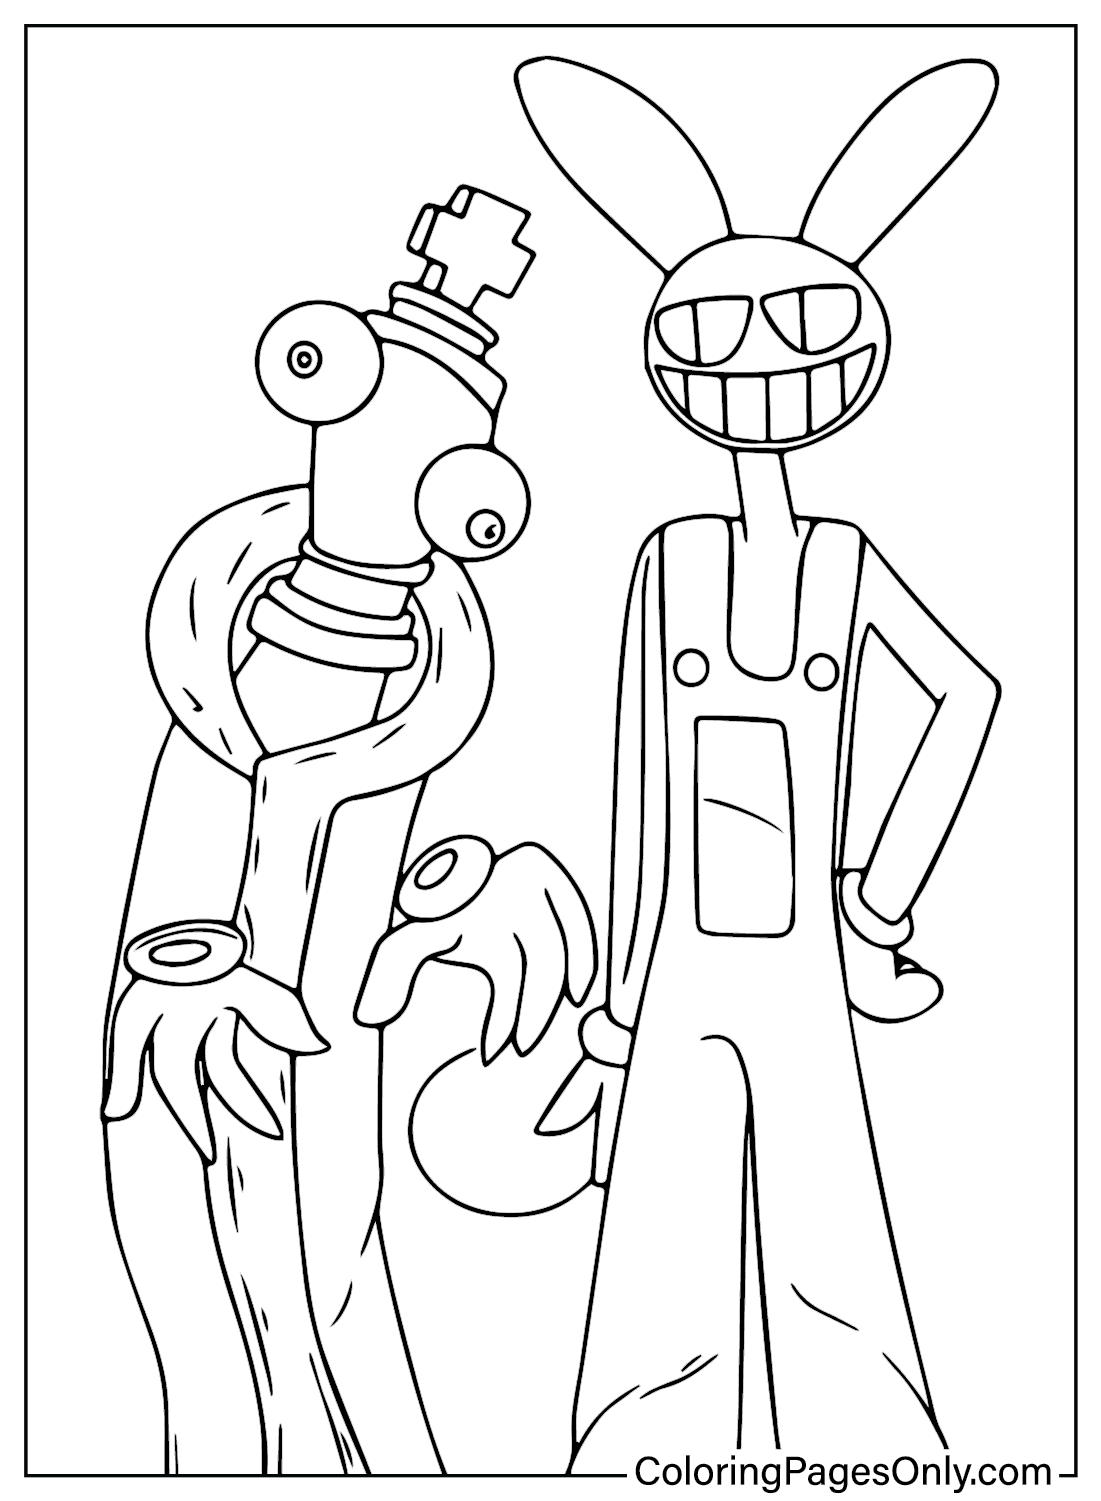 Kinger and Jax Coloring Page from Jax